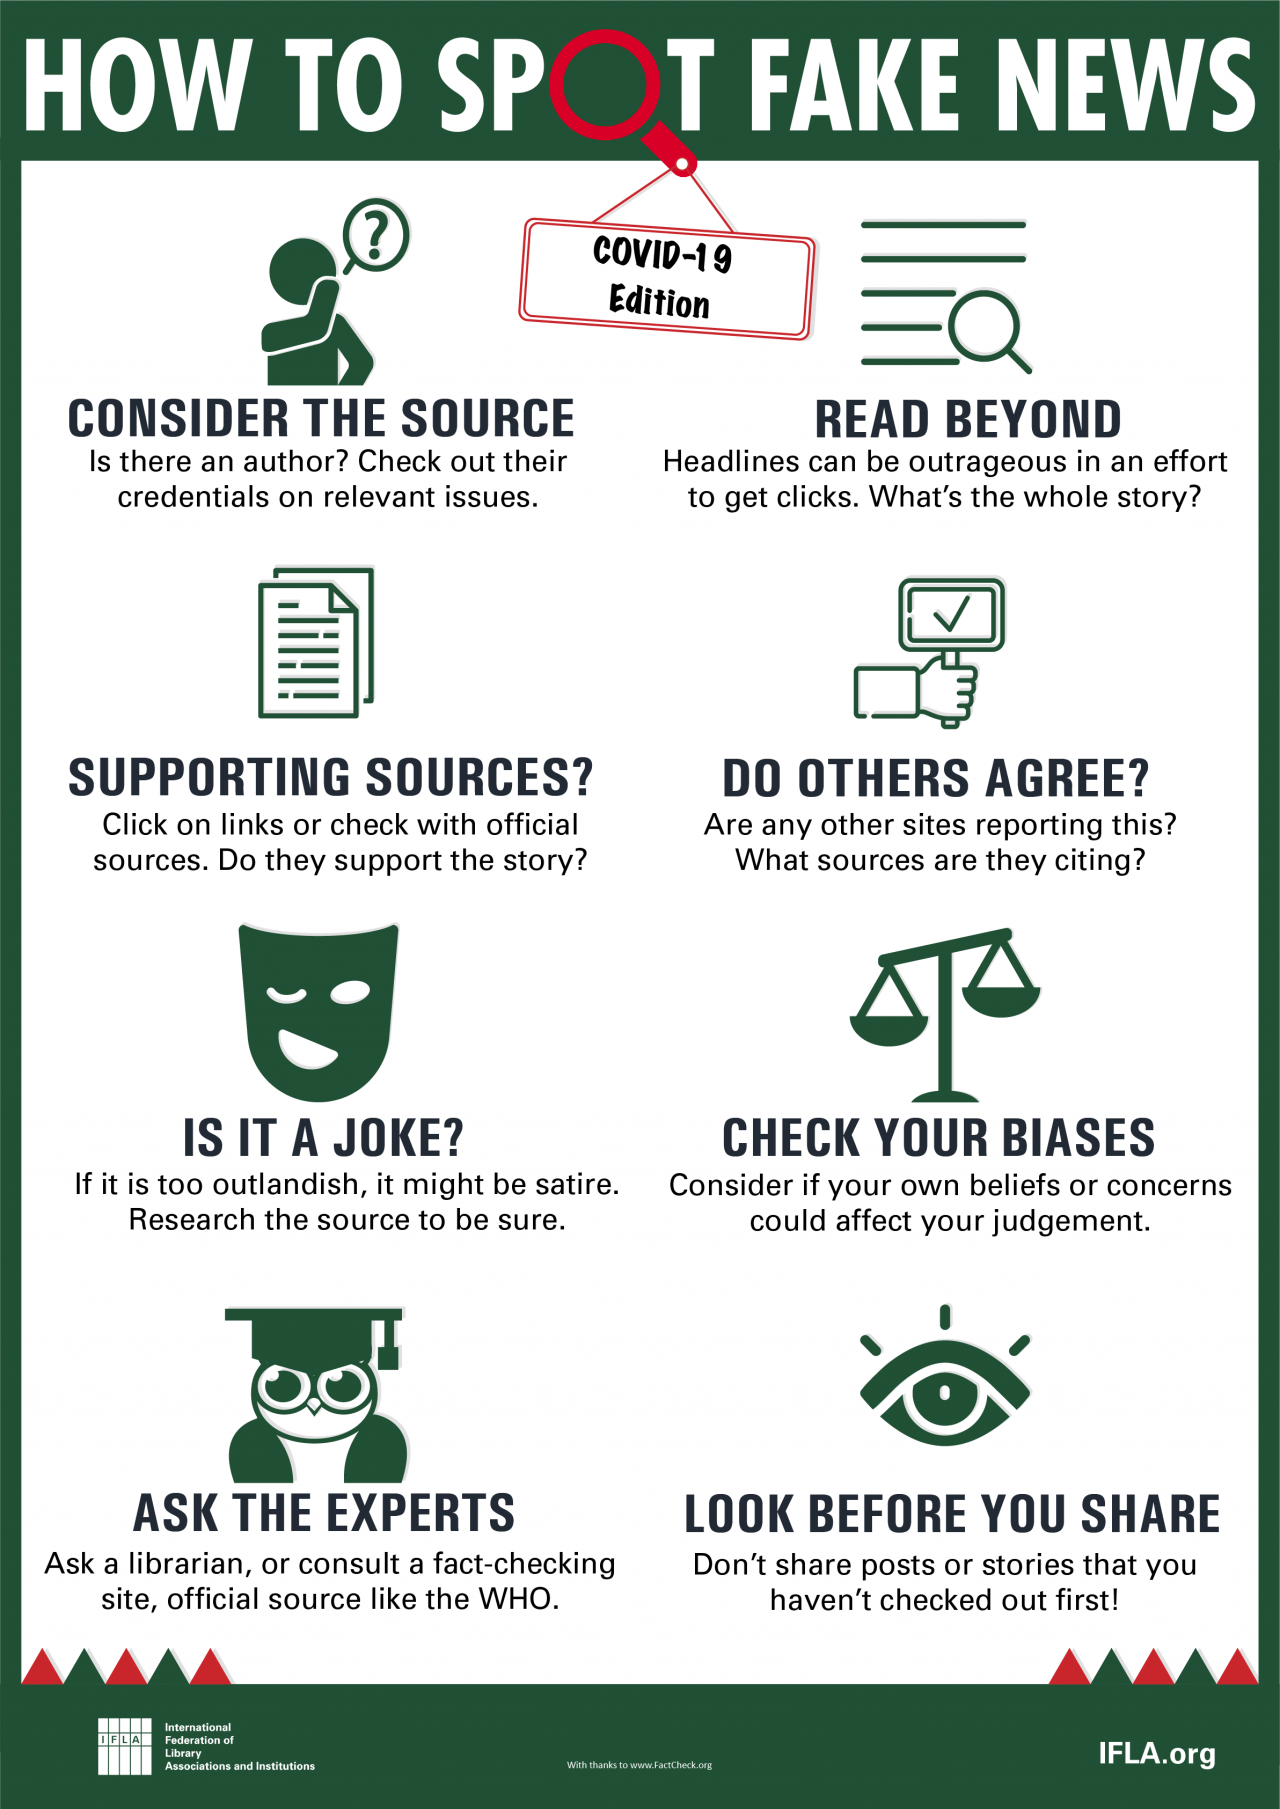 Hot to Spot Fake News - 2019 Edition Infographic